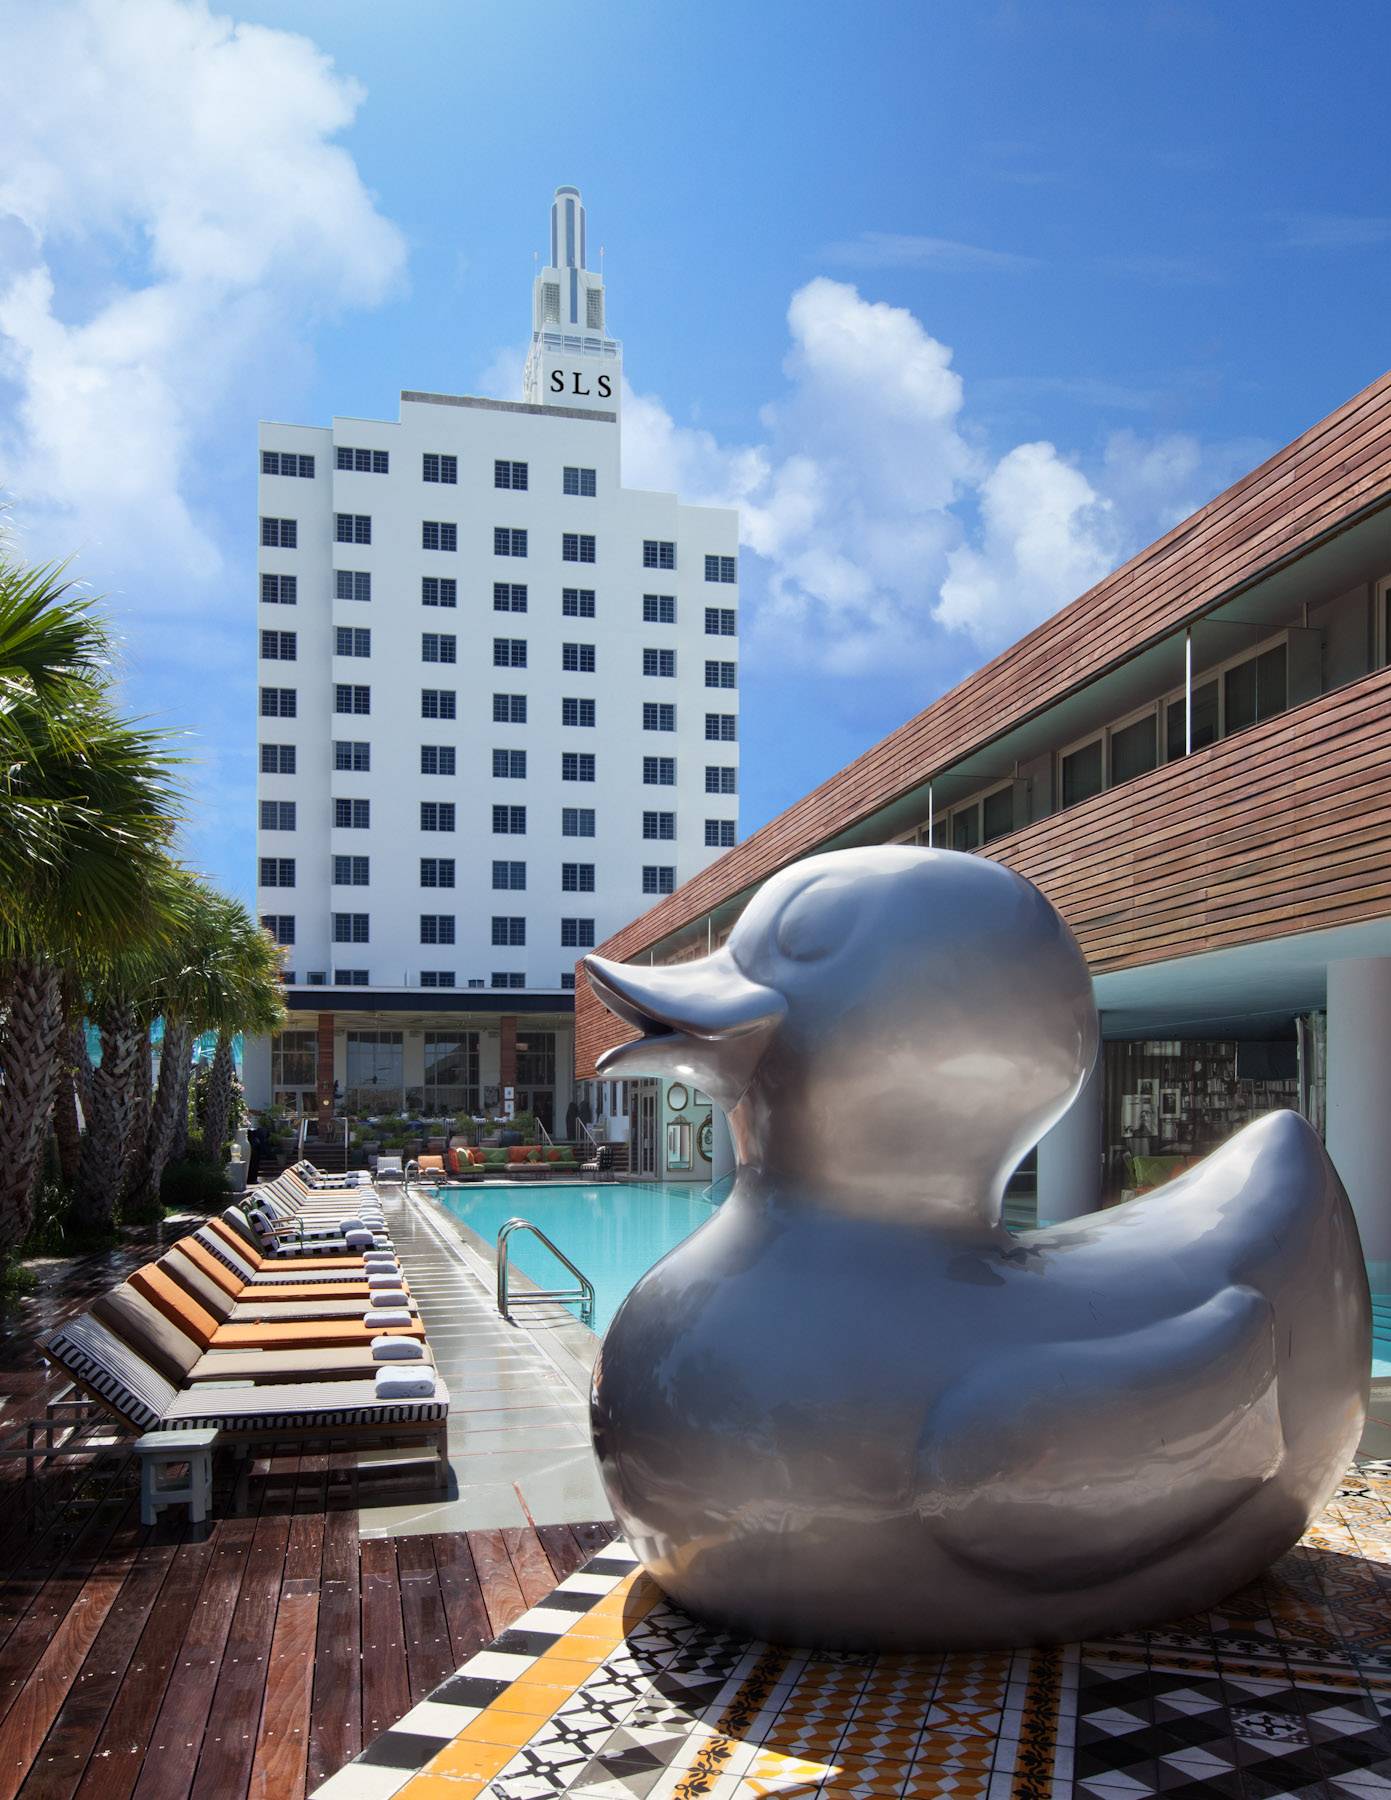 The duck and hotel_lo res